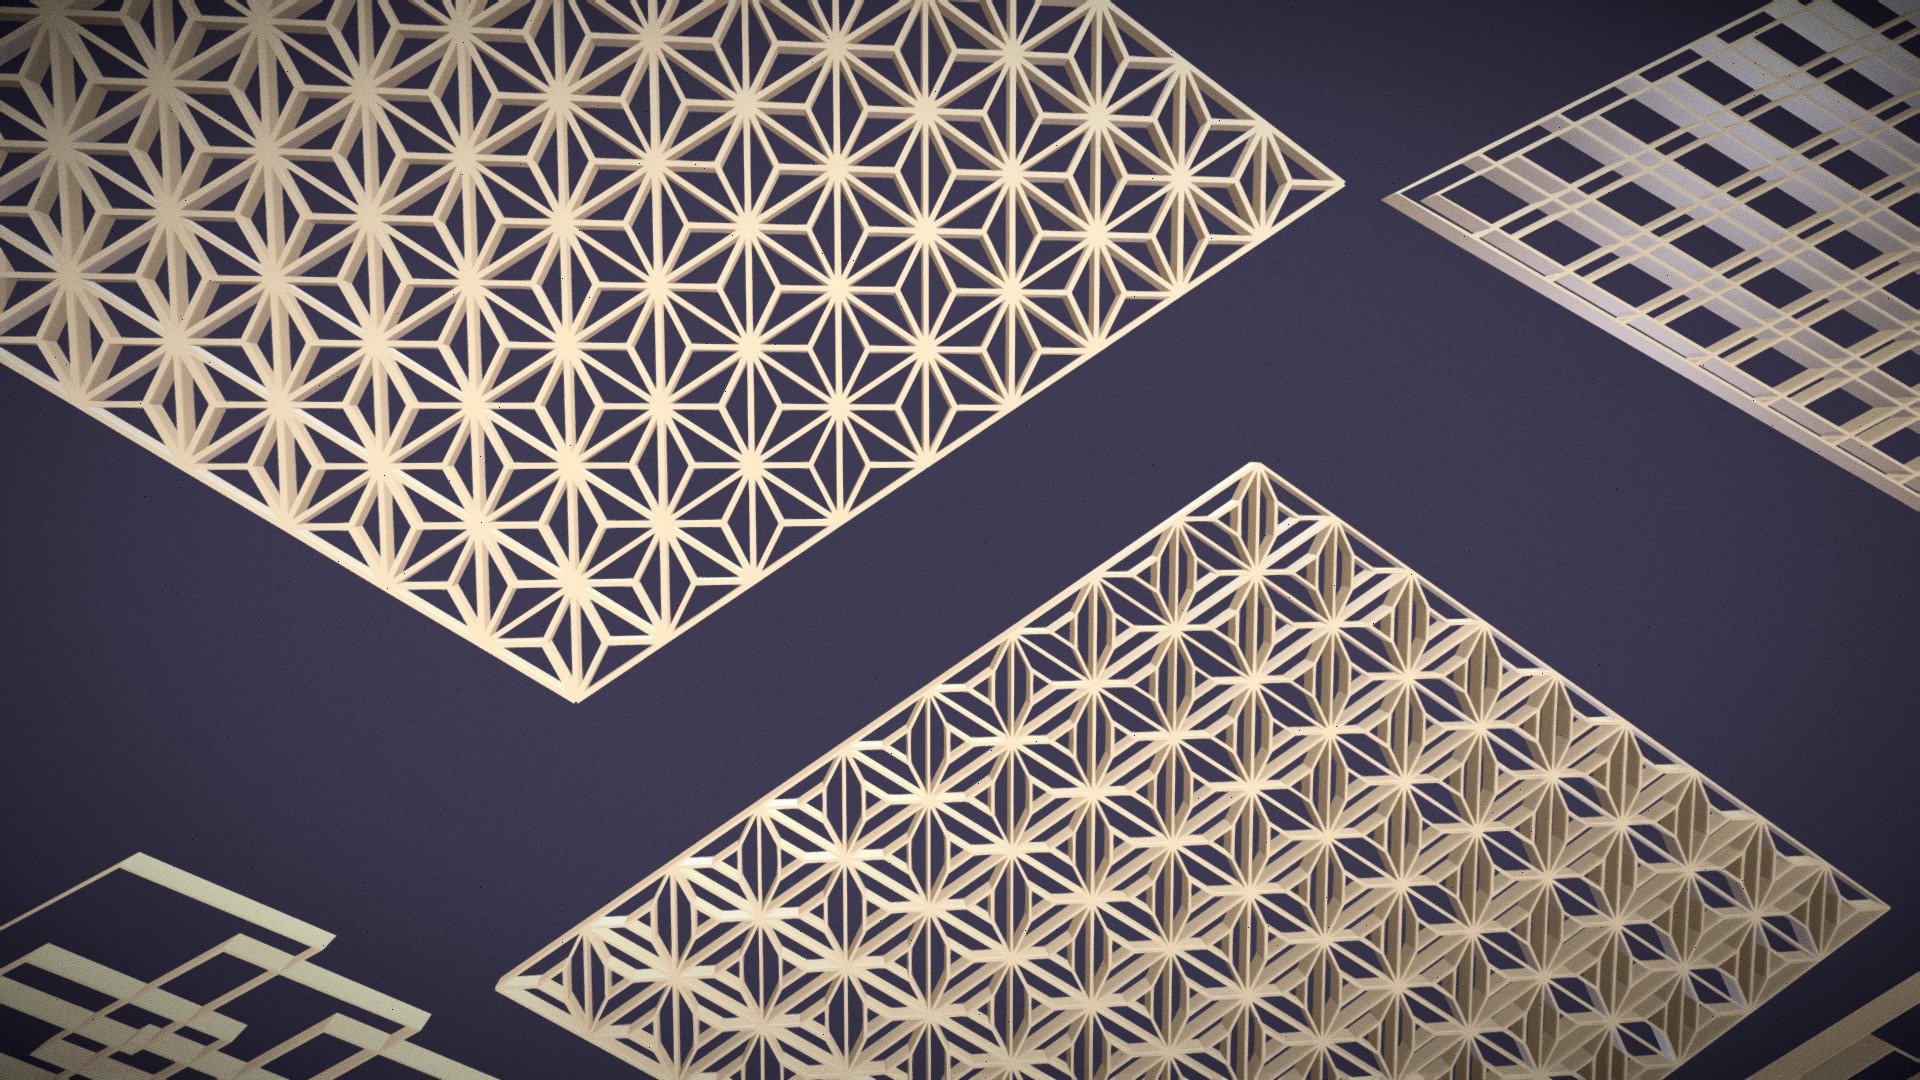 Japanese-inspired geometric patterns that can be used to spruce up bland surfaces of your 3d prints or add a Japanese flair to your architecture.
The Asanoha Pattern in particular is really strong when 3d printed!
To use only a section of the pattern, I use the Blender Boolean -&gt; Intersection modifier.
I found some of the names for the patterns and they are: Asanoha, Futae-bishi, Goma, Hishi, Mitsukude, and Shippo-Tsunagi 3d model